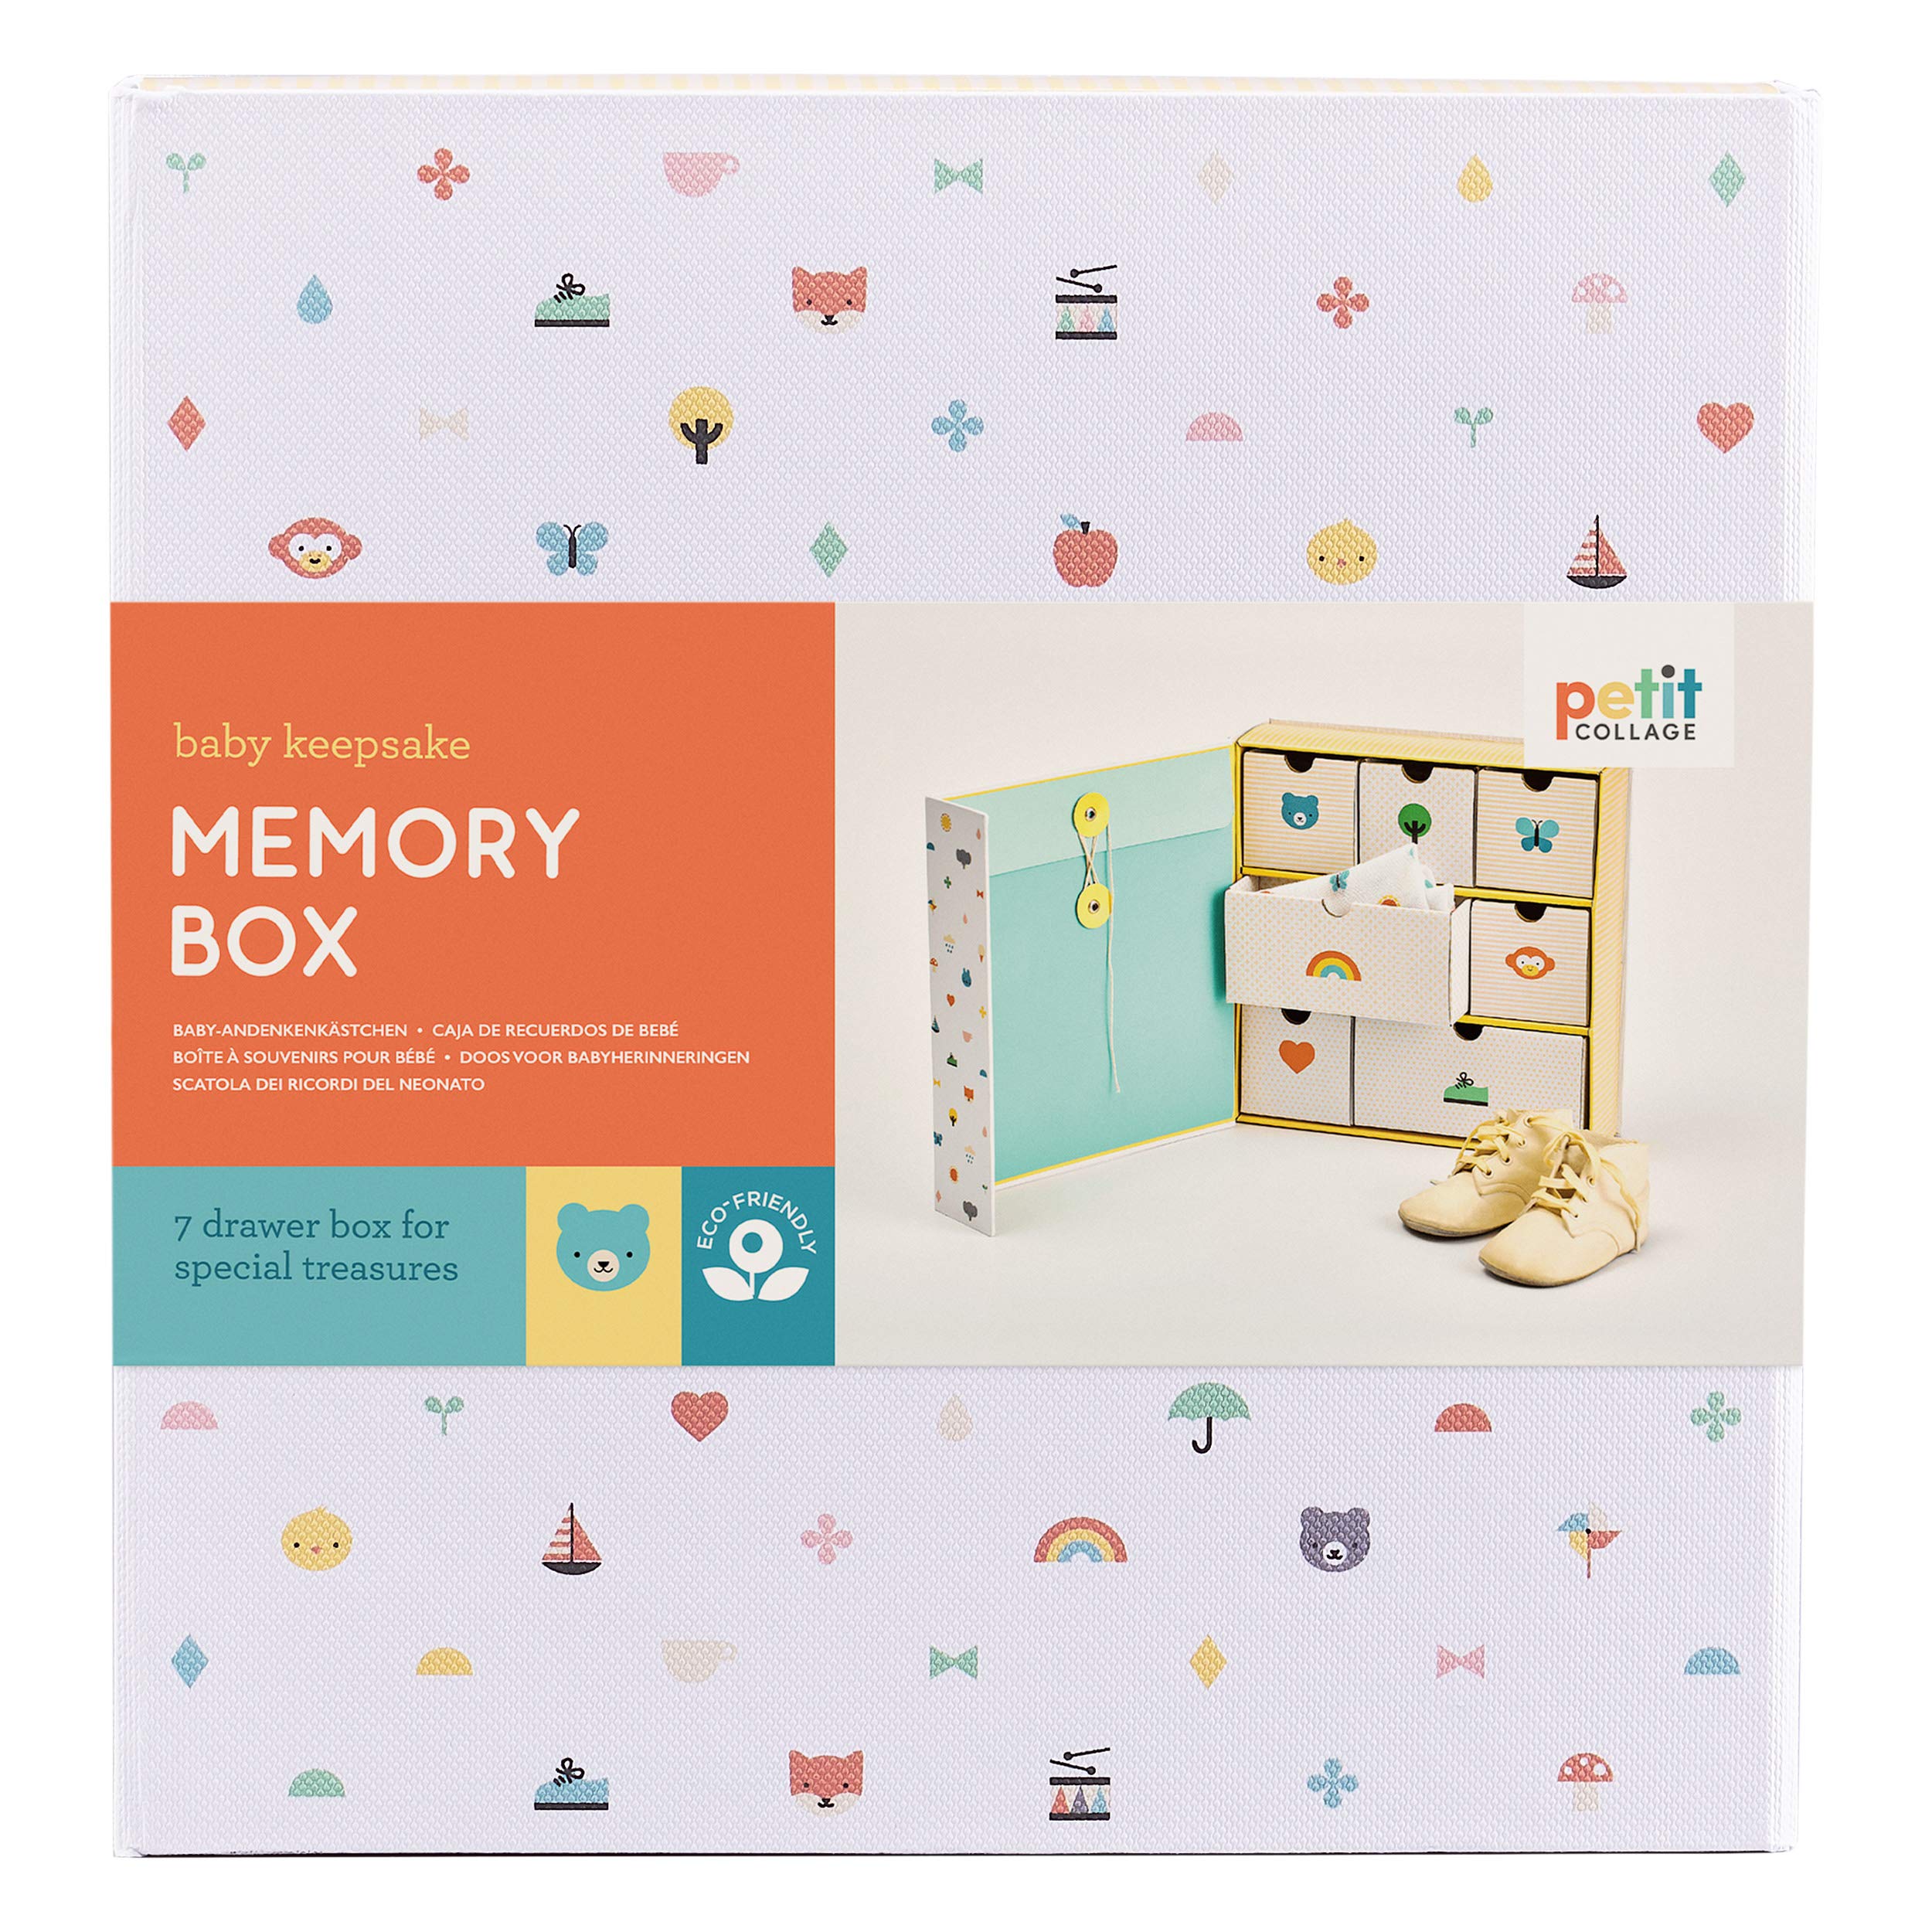 Petit Collage Newborn Baby Memory Box – Keepsake Box with 7-Drawers for All of Baby’s Firsts, Makes an Inspired Gift for Baby Showers and Expectant Moms